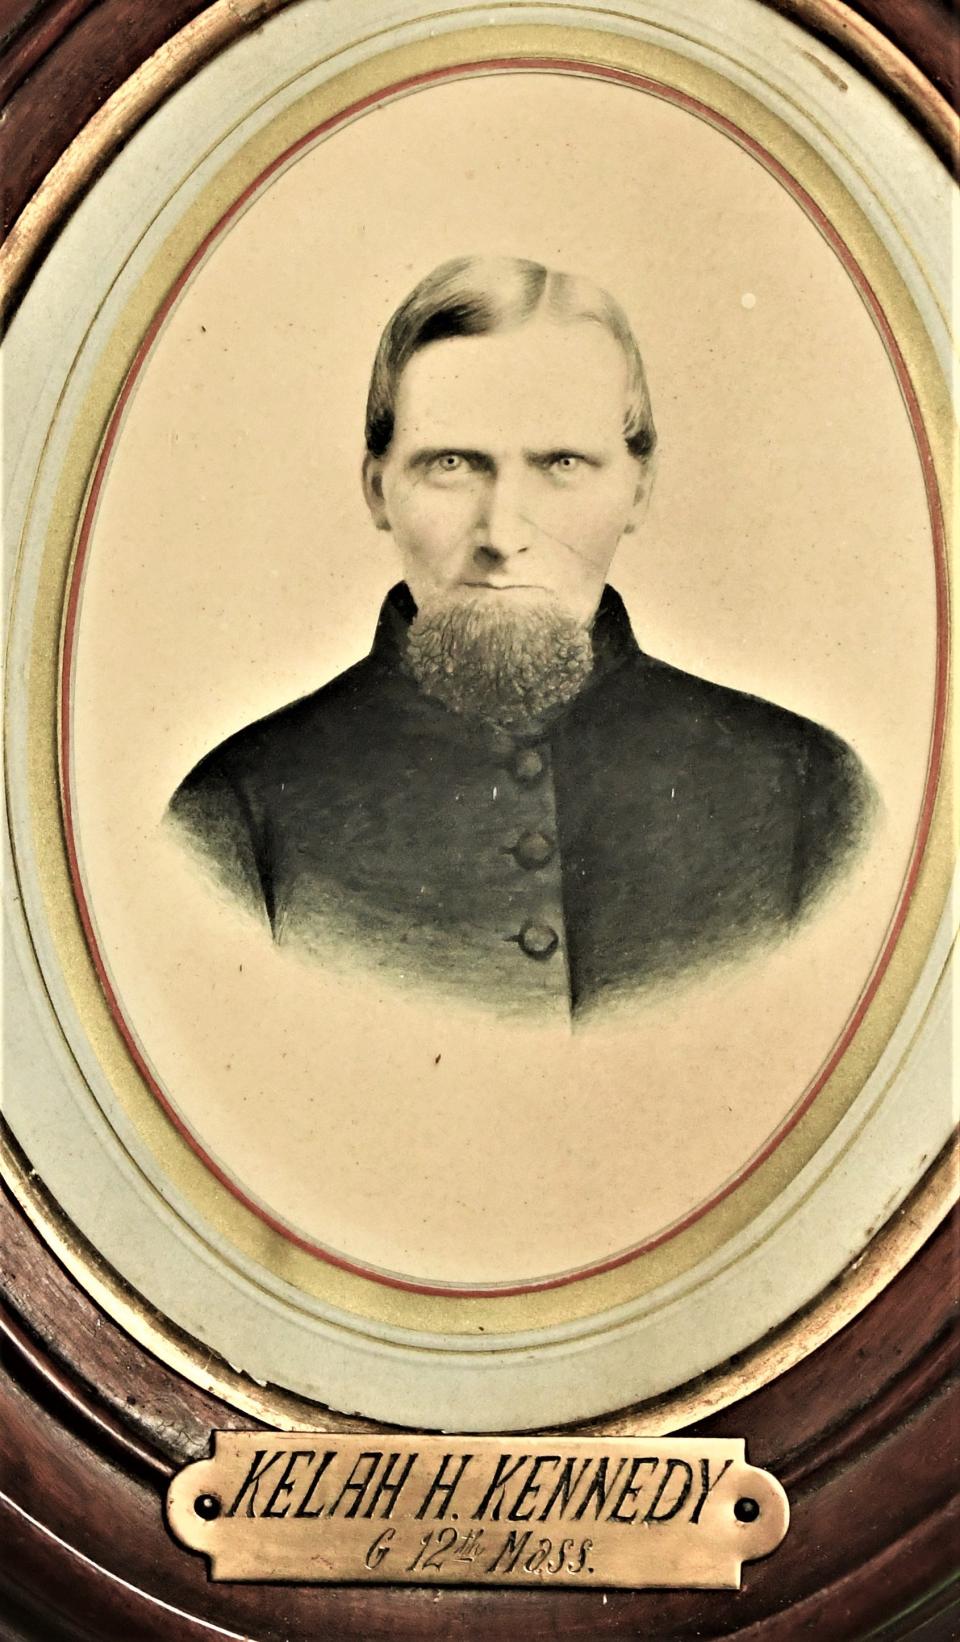 Keilah Kennedy was one of "the unreturned" Civil War soldiers from East Abington (now Rockland.)